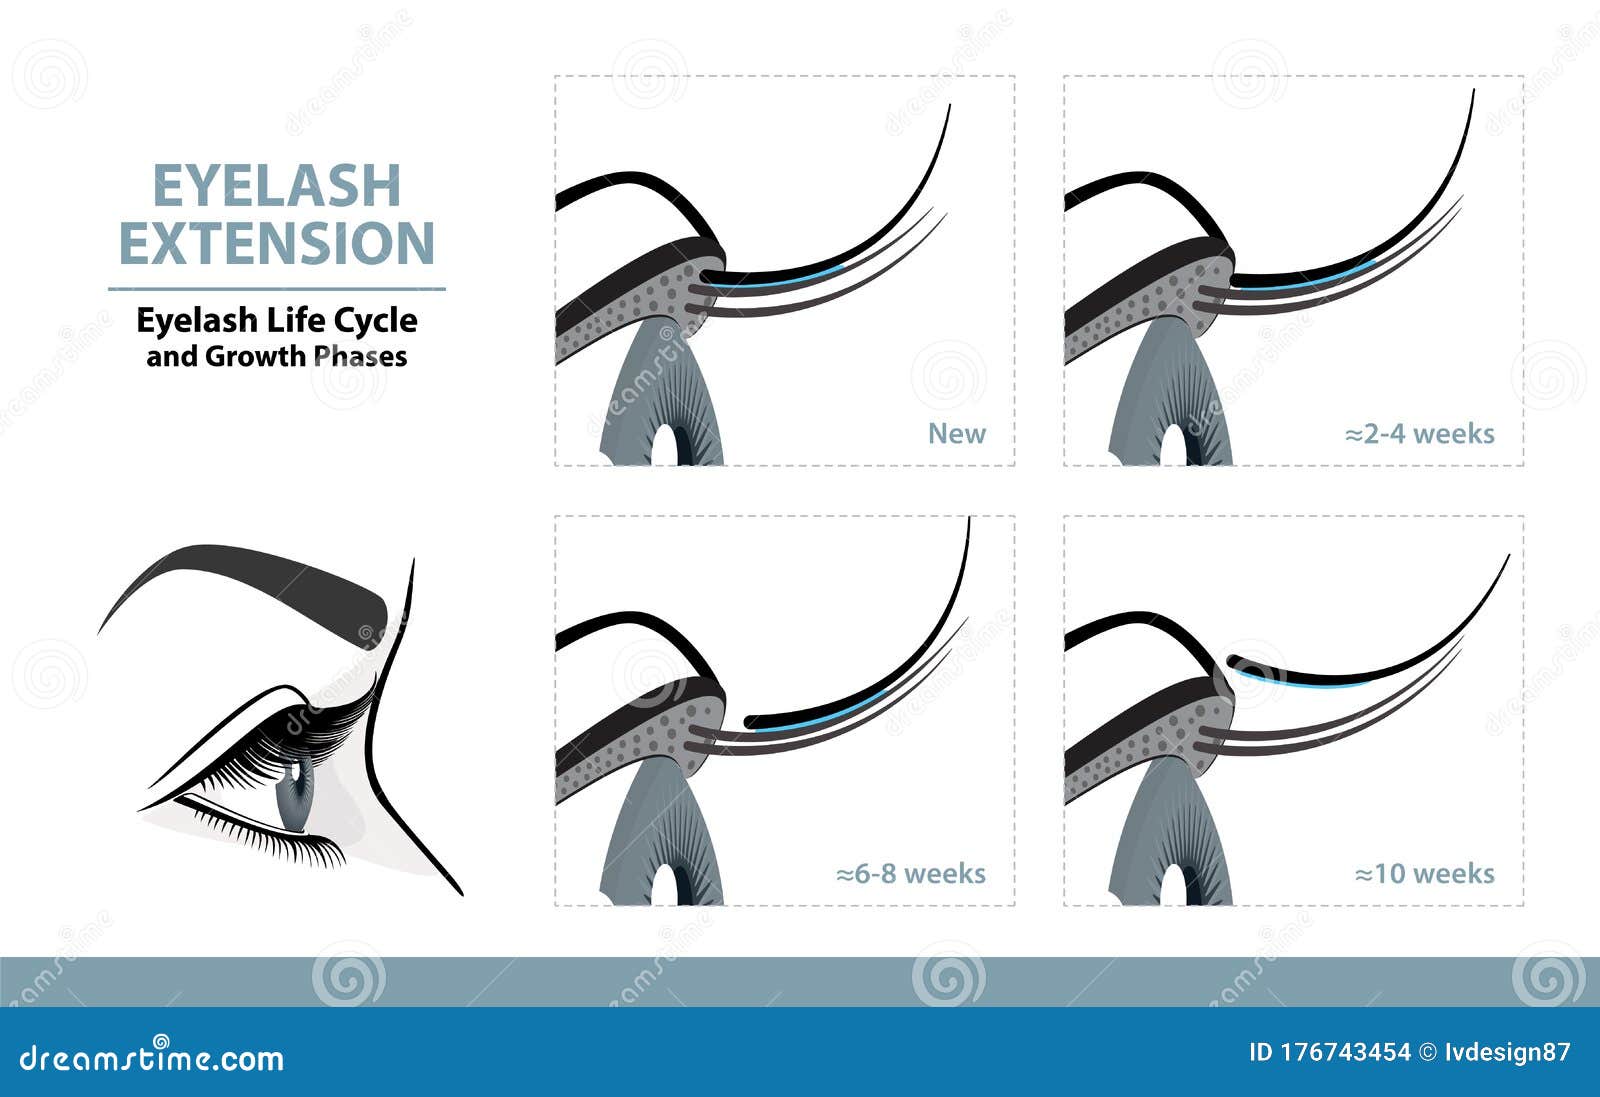 lash extension life cycle. how long do eyelash extensions stay on. side view. infographic 